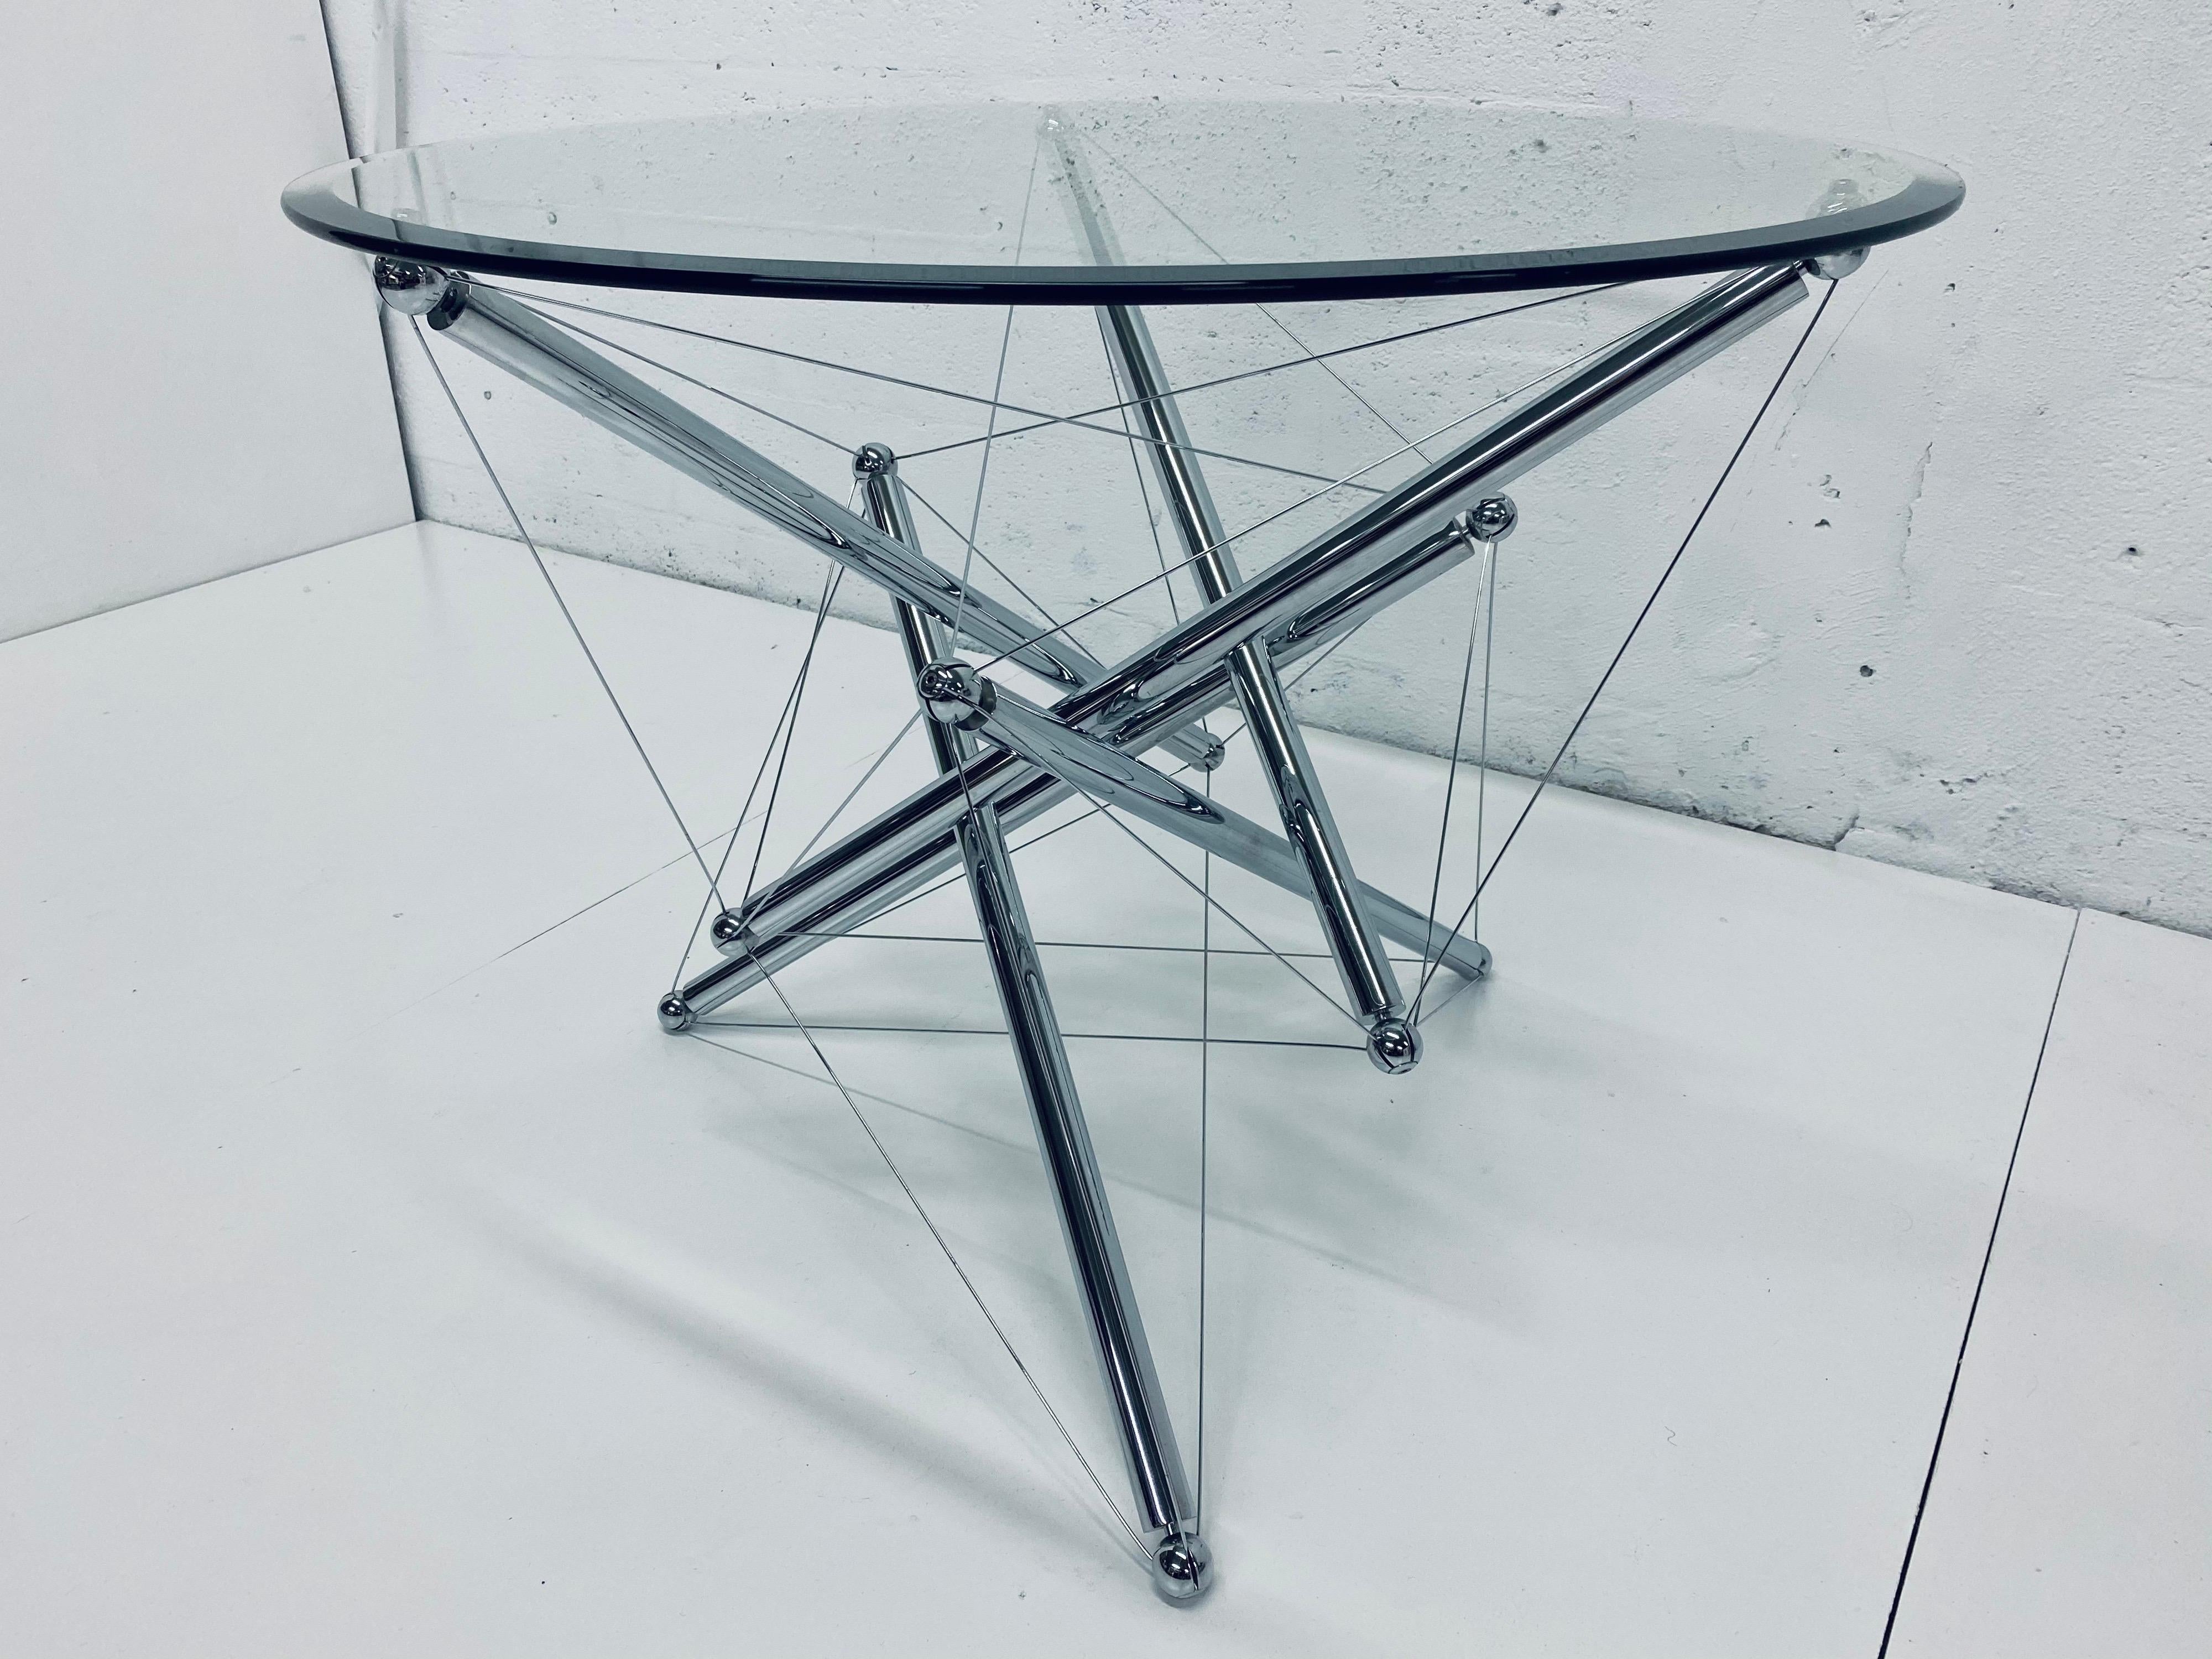 Theodore Waddell designed tensegrity table made of chrome-plated steel tubing and steel tension wires with one inch beveled glass top. Easily replace glass with up to 53 inches as recommended by Cassina.